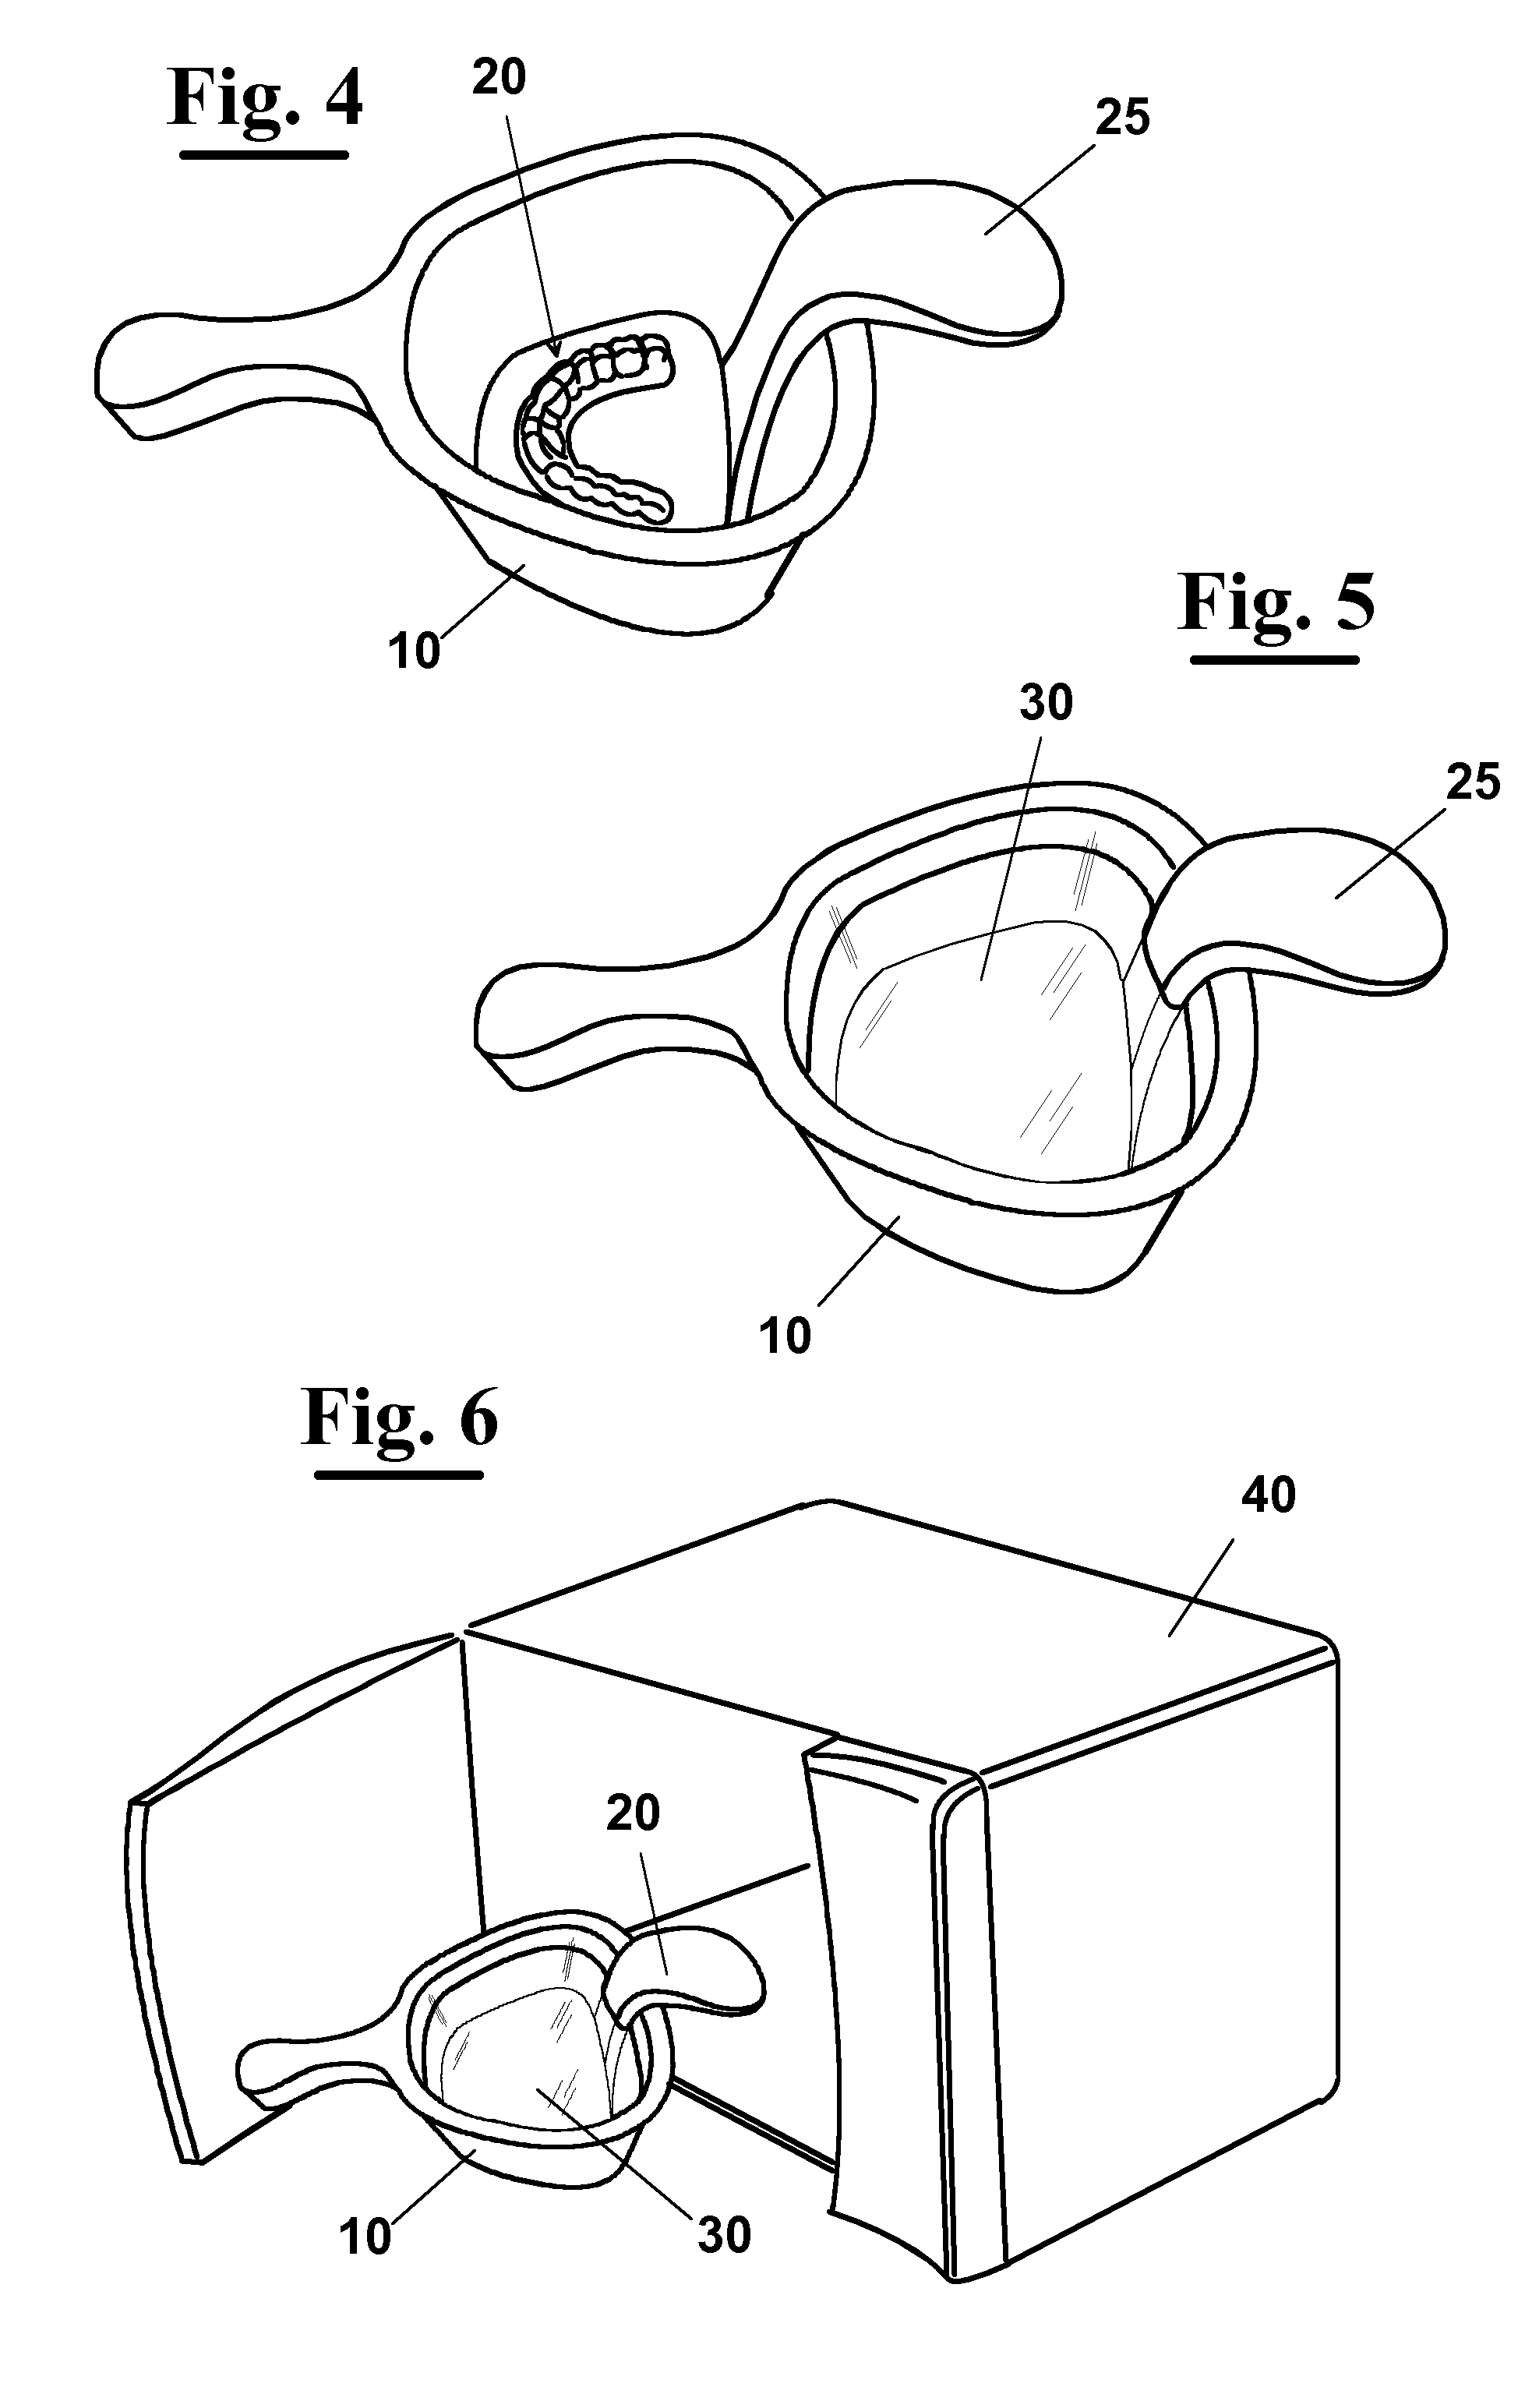 Method for making an impression tray for dental use